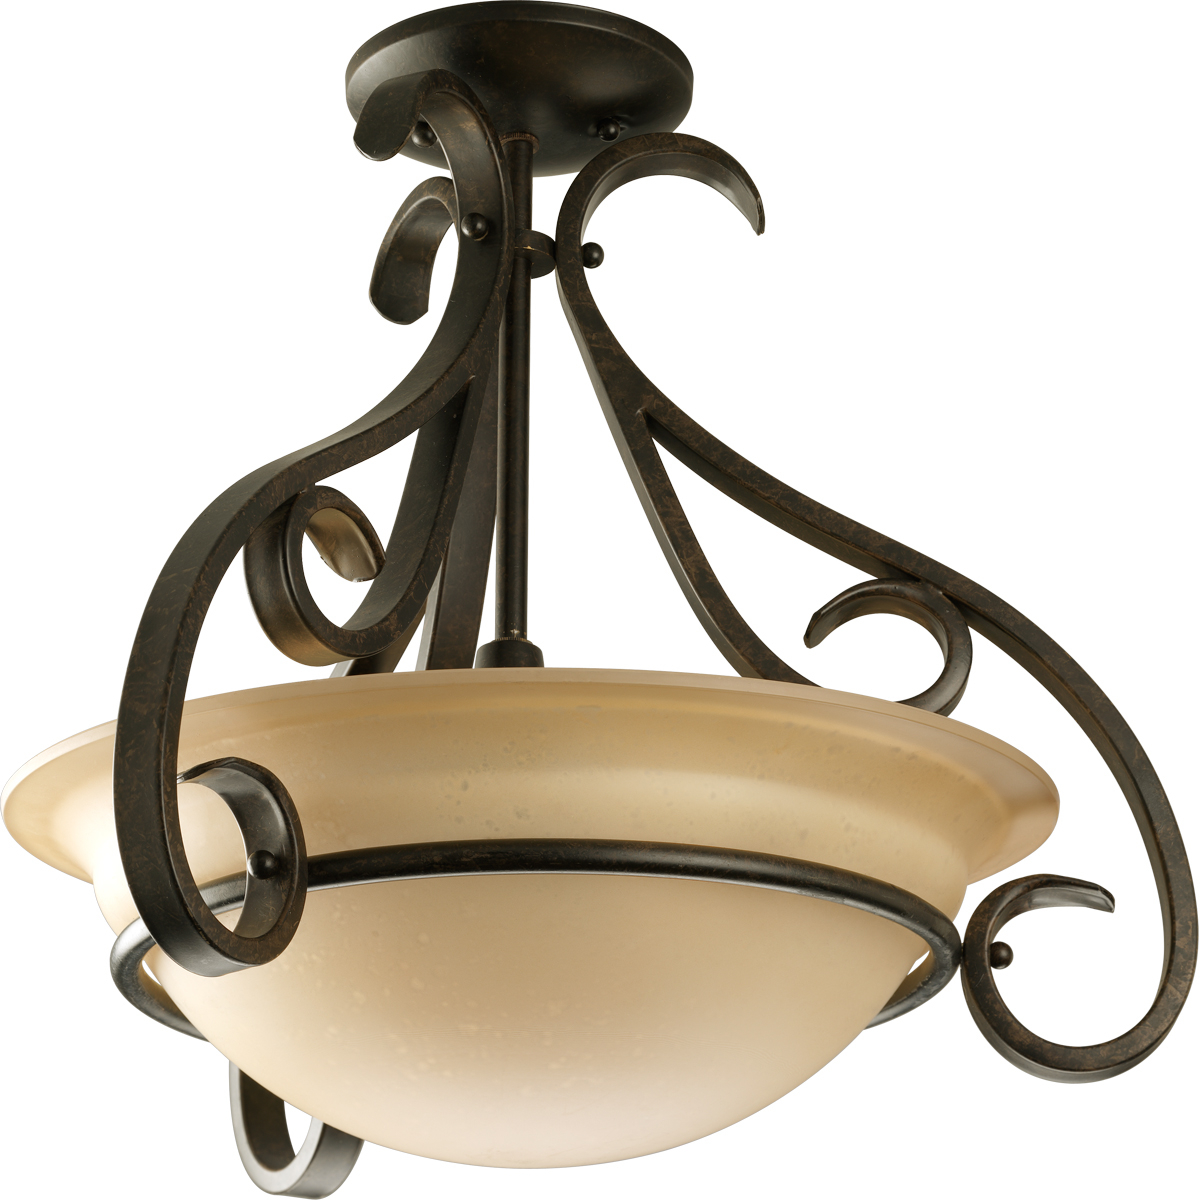 Three-light semi-flush with tea stained oversized, bell-shaped glass bowl. Distinctive ebbing and flowing of squared scrolls and arms in Forged Bronze finish. Chain and ceiling mounts both included.